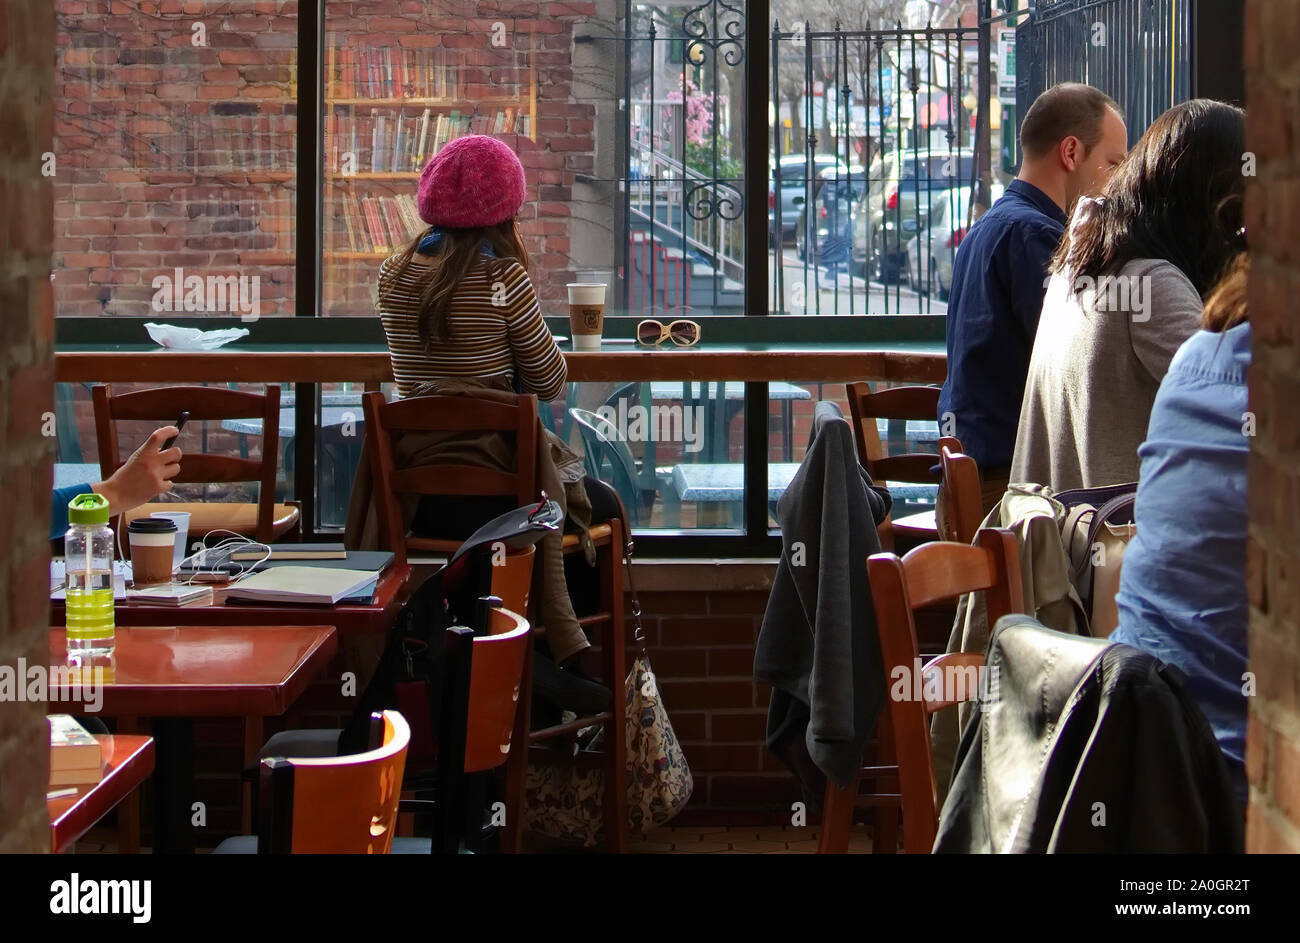 New Haven, CT USA. Mar 2016. Young woman wearing a beret sitting on a cafe high table busy on her phone like most of the customers around her. Stock Photo